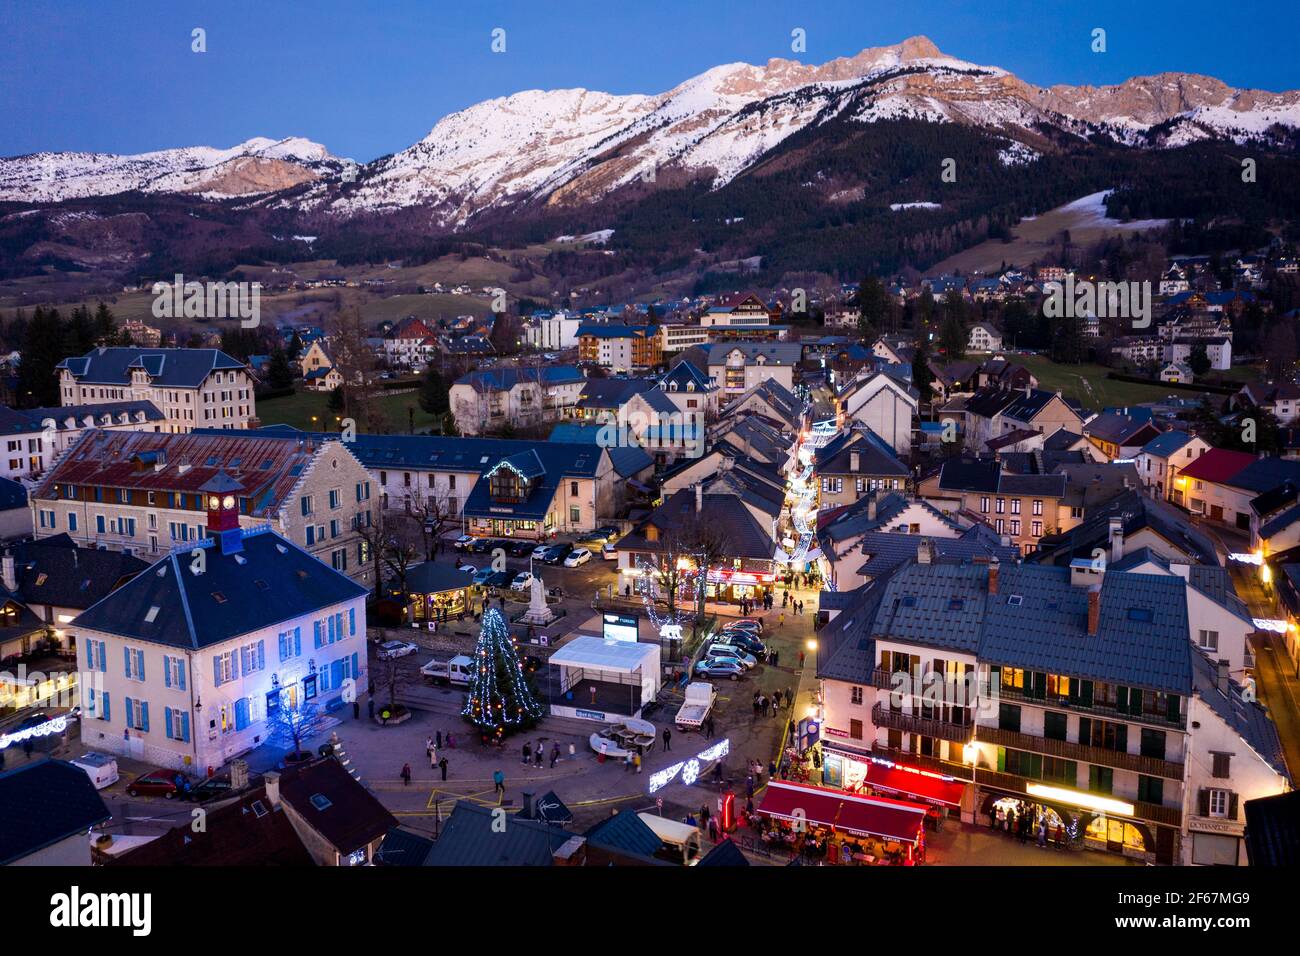 Aerial evening view of houses in mountain village. Blue hour photo with snowcapped mountains in background, Vercors, France. Stock Photo